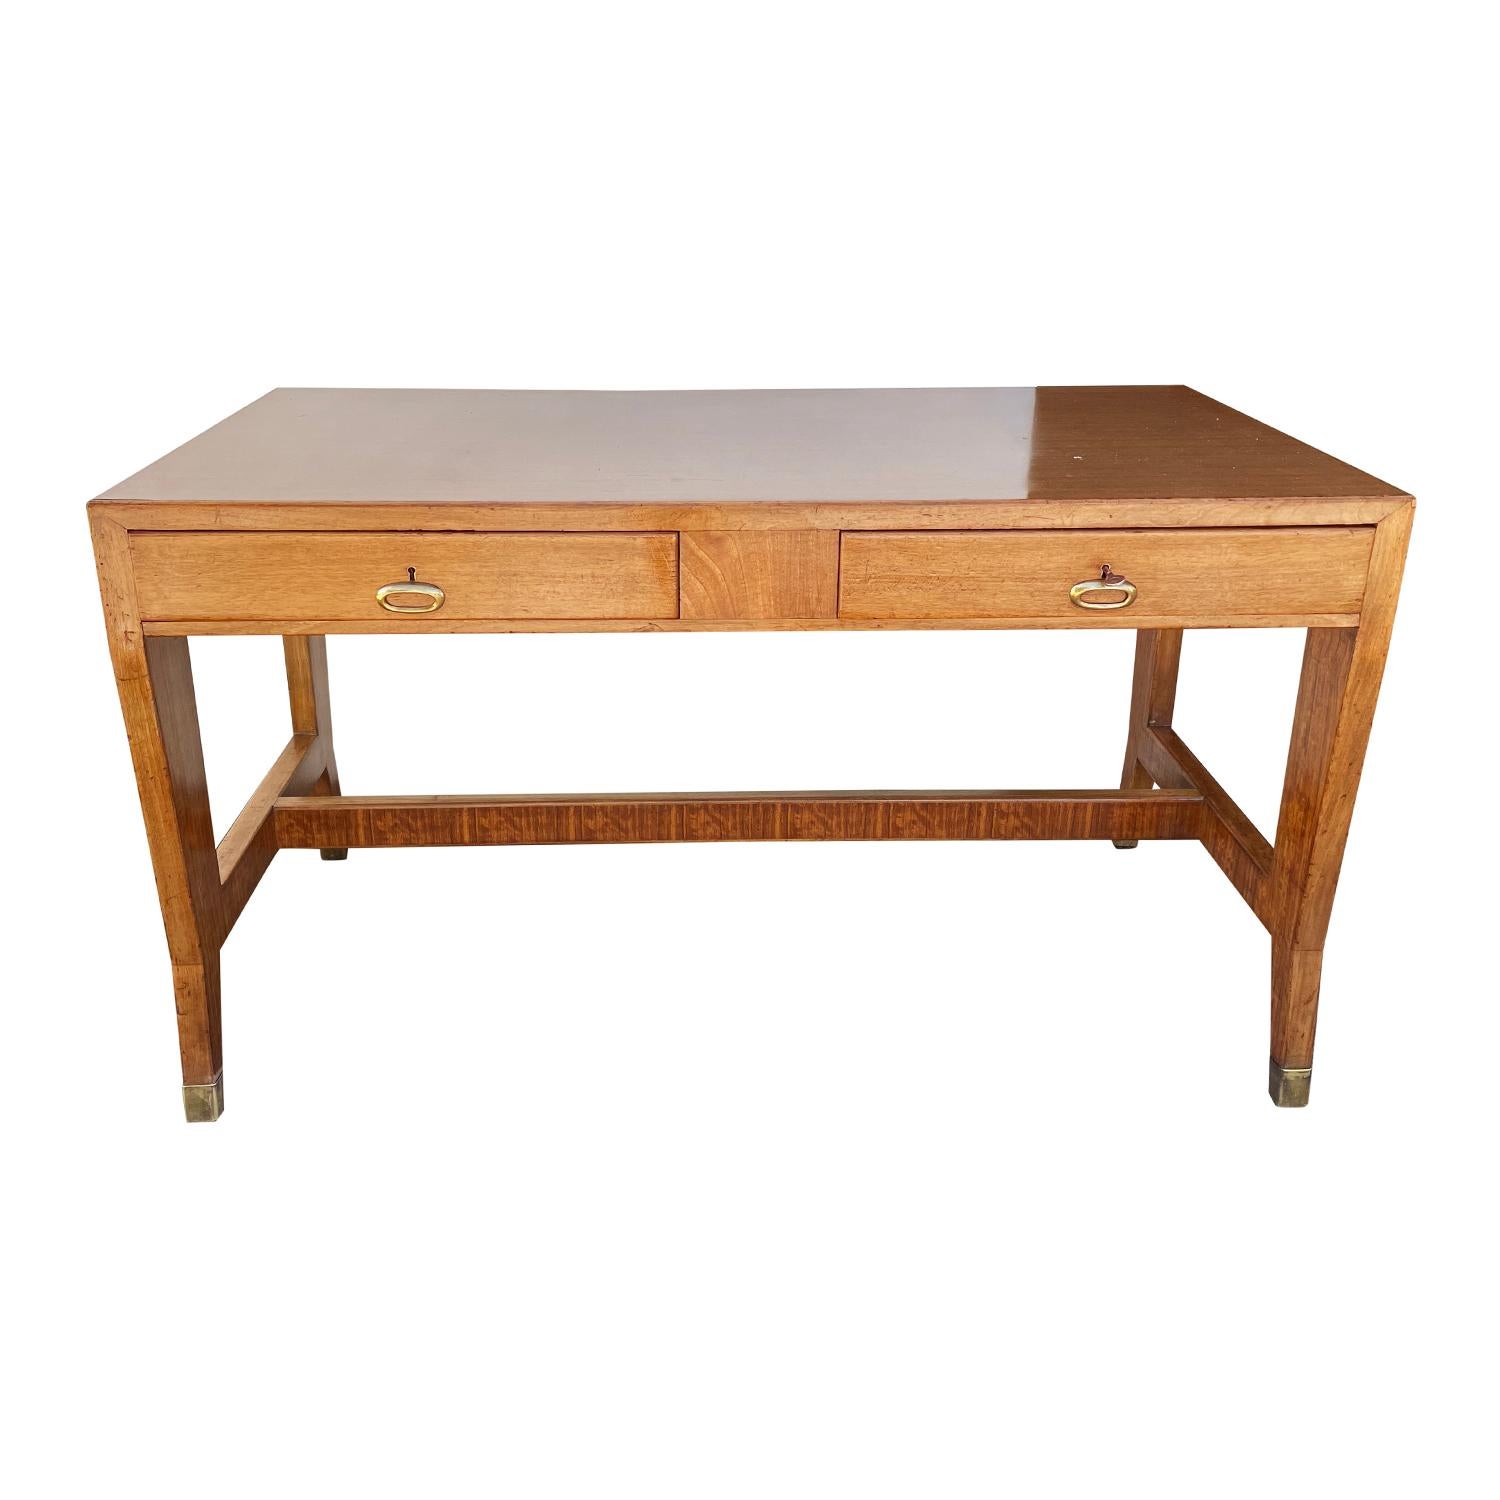 Hand-Carved 20th Century Italian Walnut Writing Table, Desk Set with a Chair by Gio Ponti For Sale